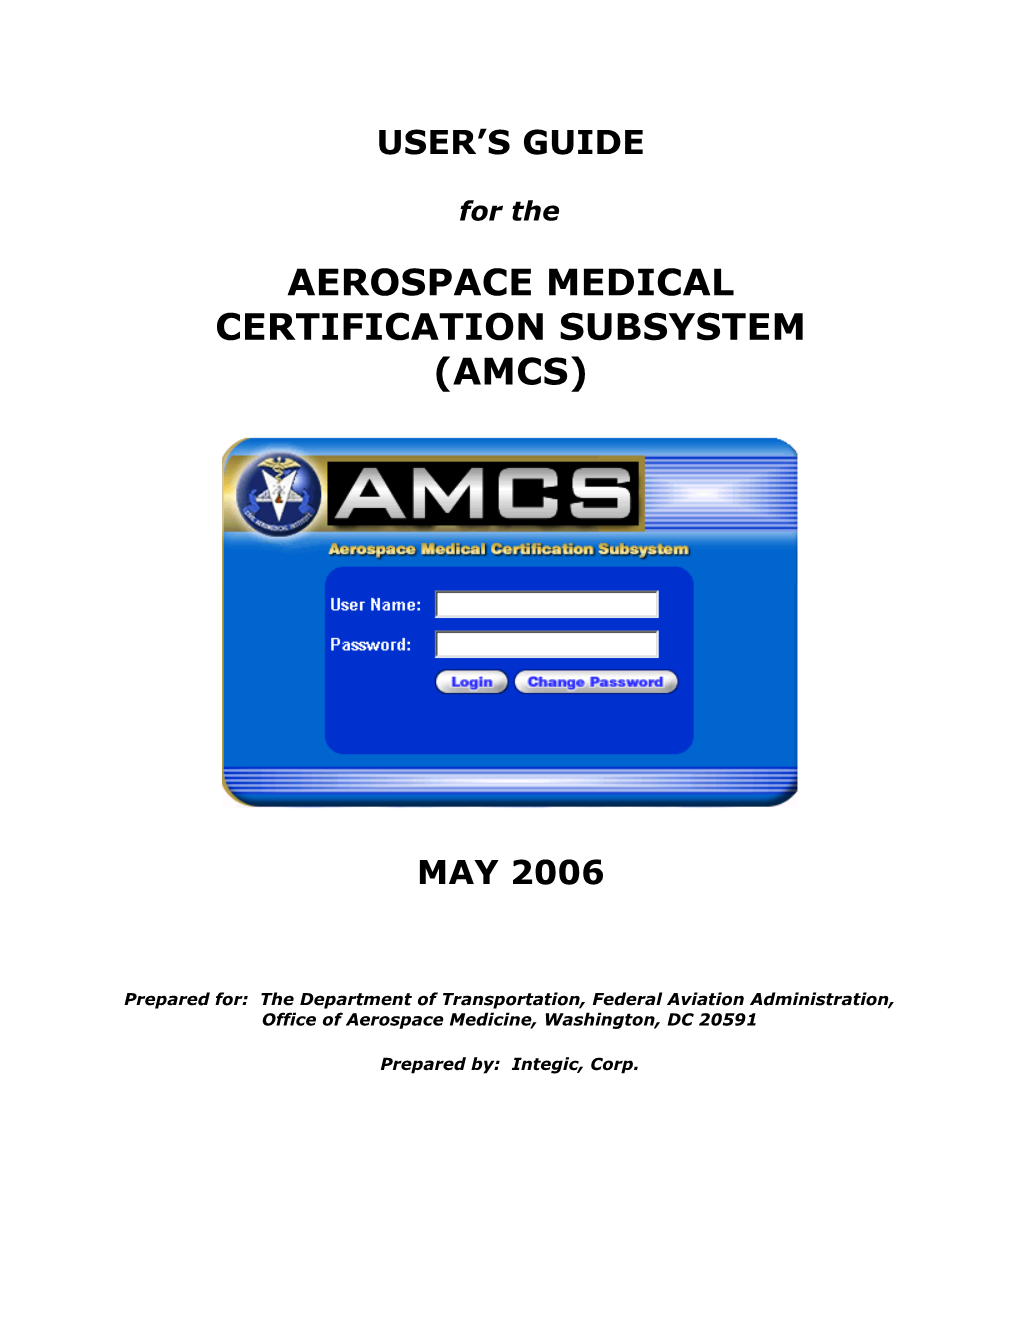 Aerospace Medical Certification Subsystem